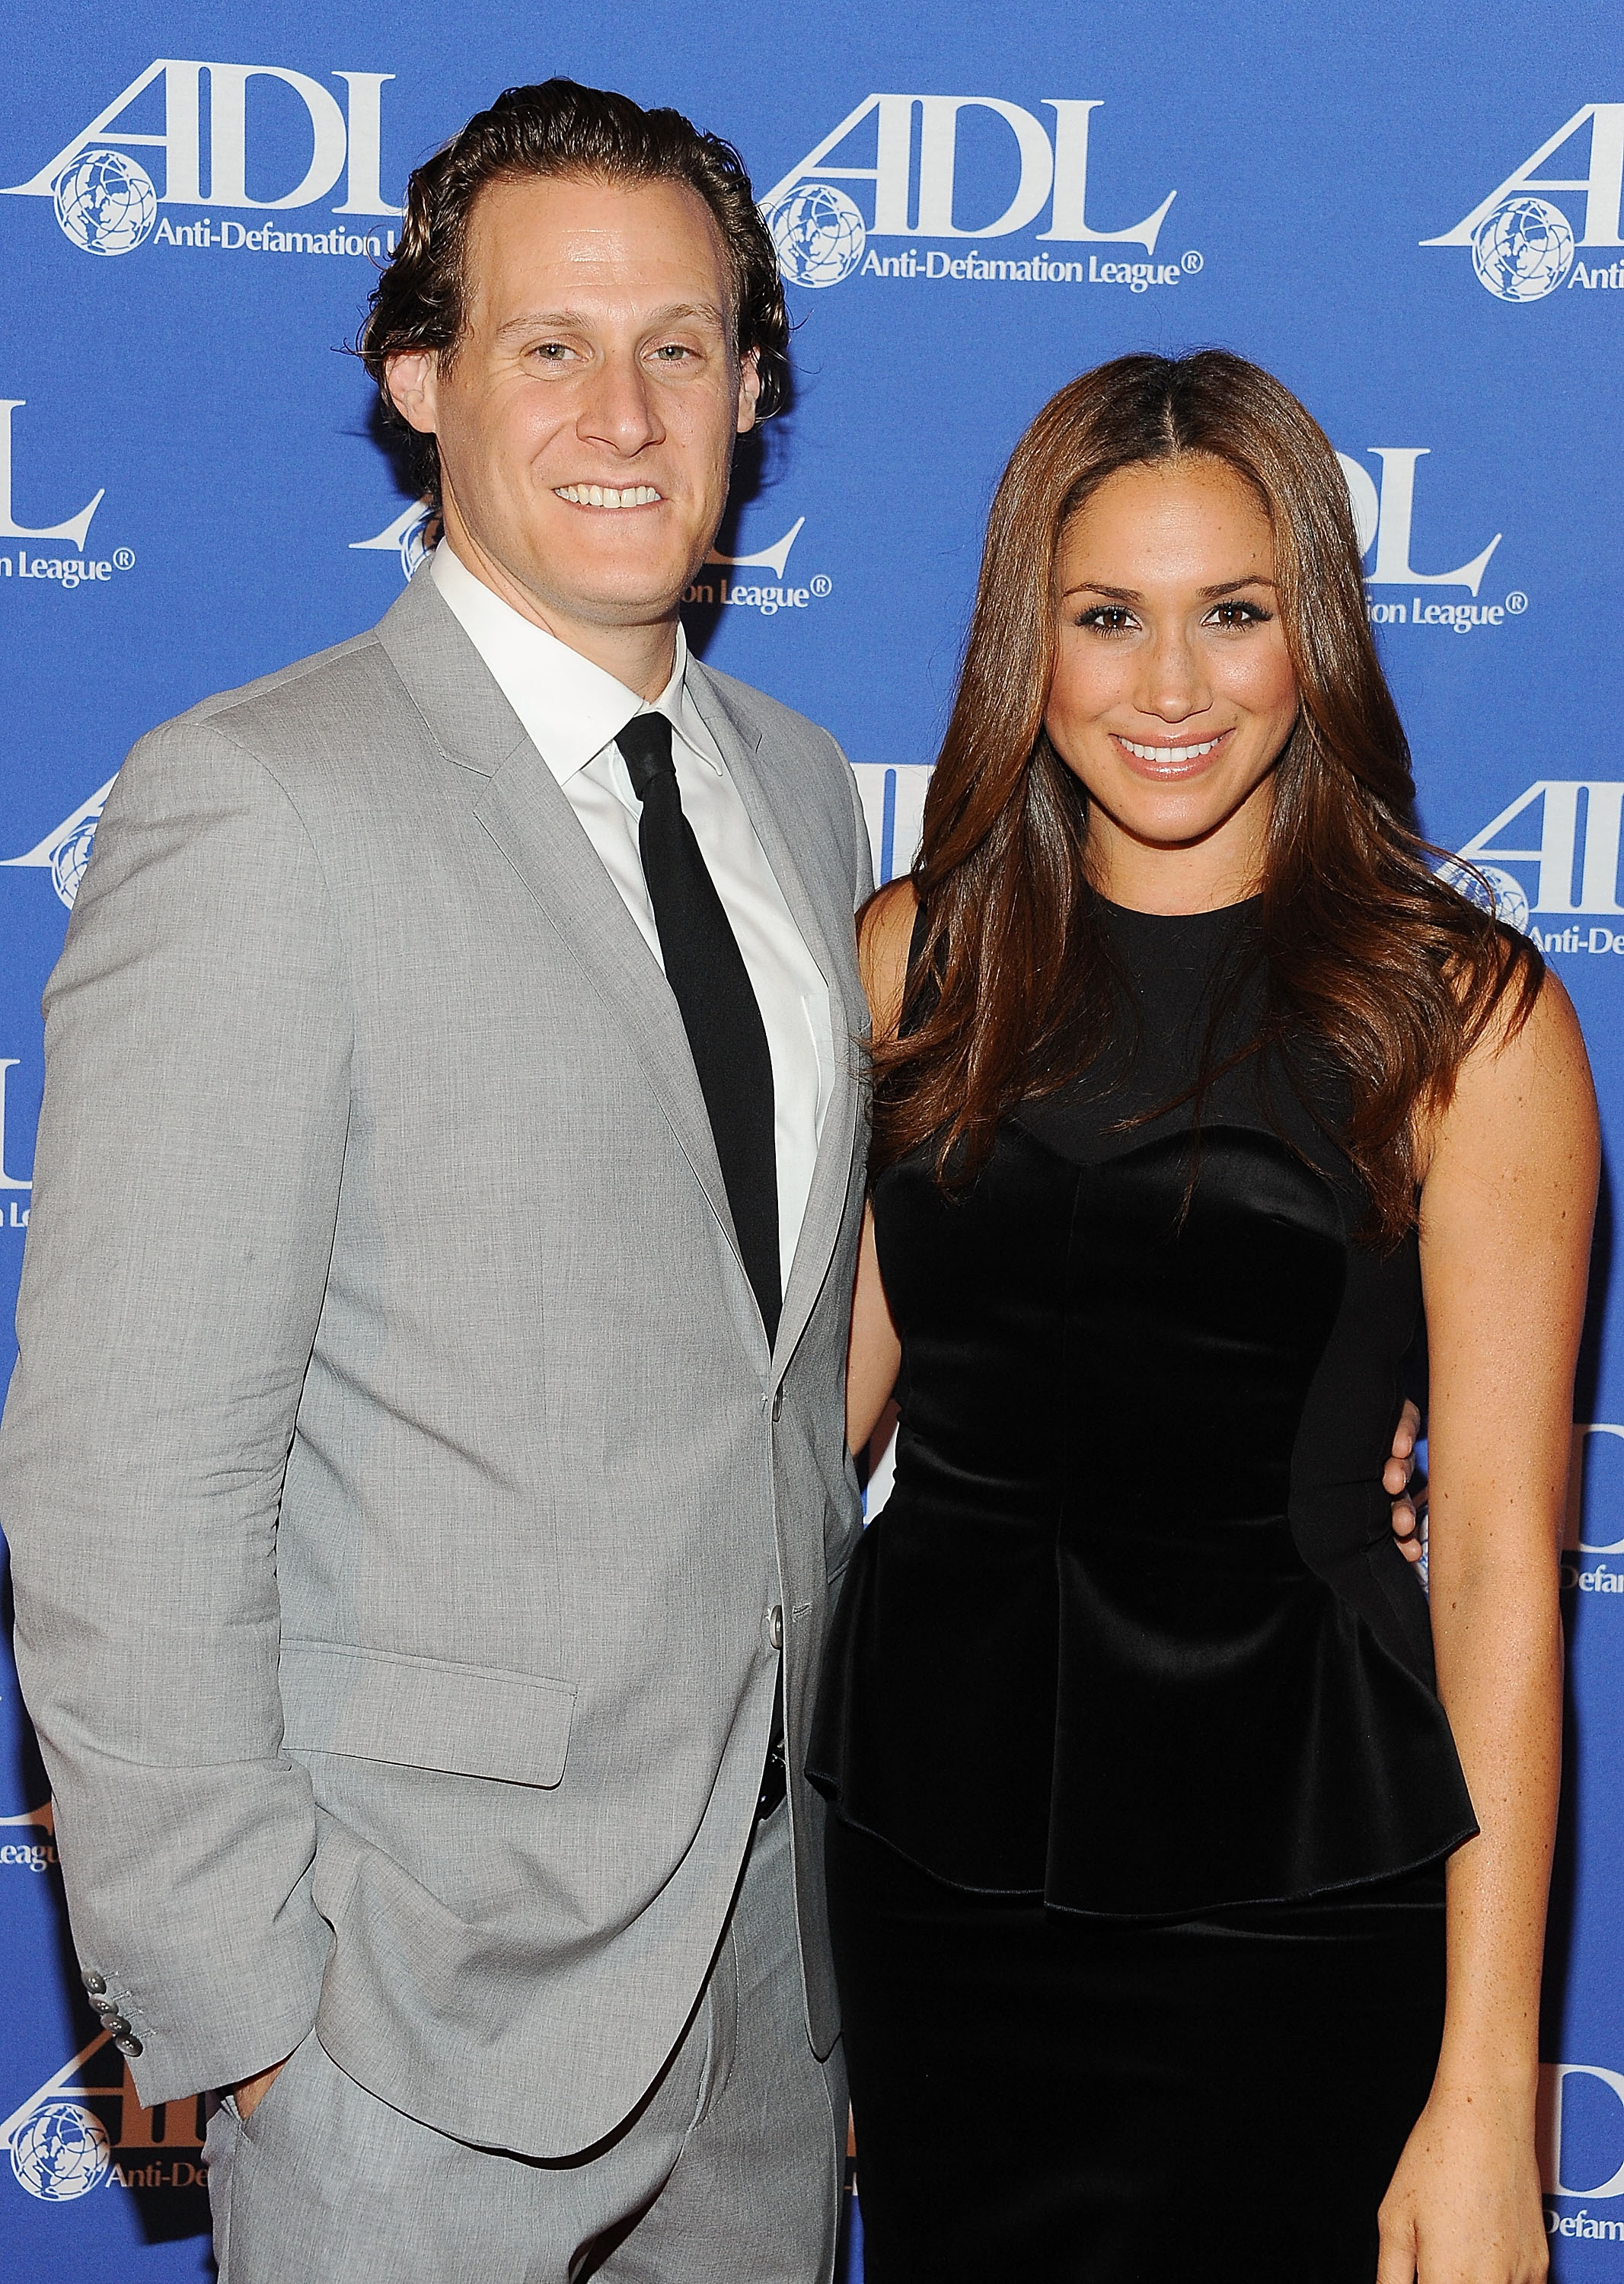 Trevor Engelson and Meghan Markle arrives at the Anti-Defamation League Entertainment Industry Awards Dinner at The Beverly Hilton hotel on October 11, 2011 in Beverly Hills, California. | Source: Getty Images